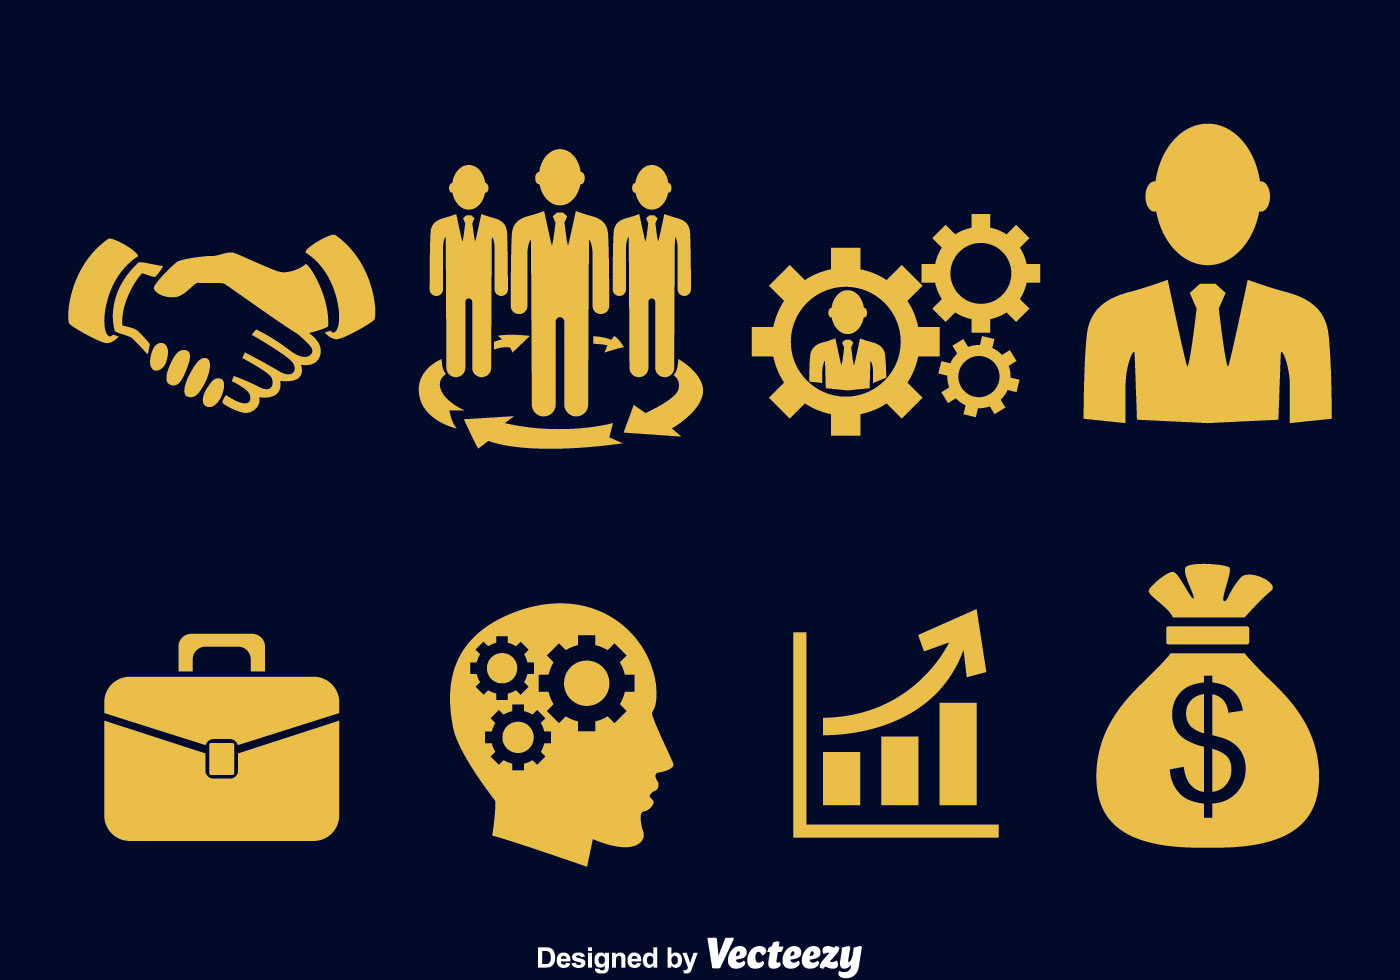 Download Business Icons Vector - Download Free Vector Art, Stock ...